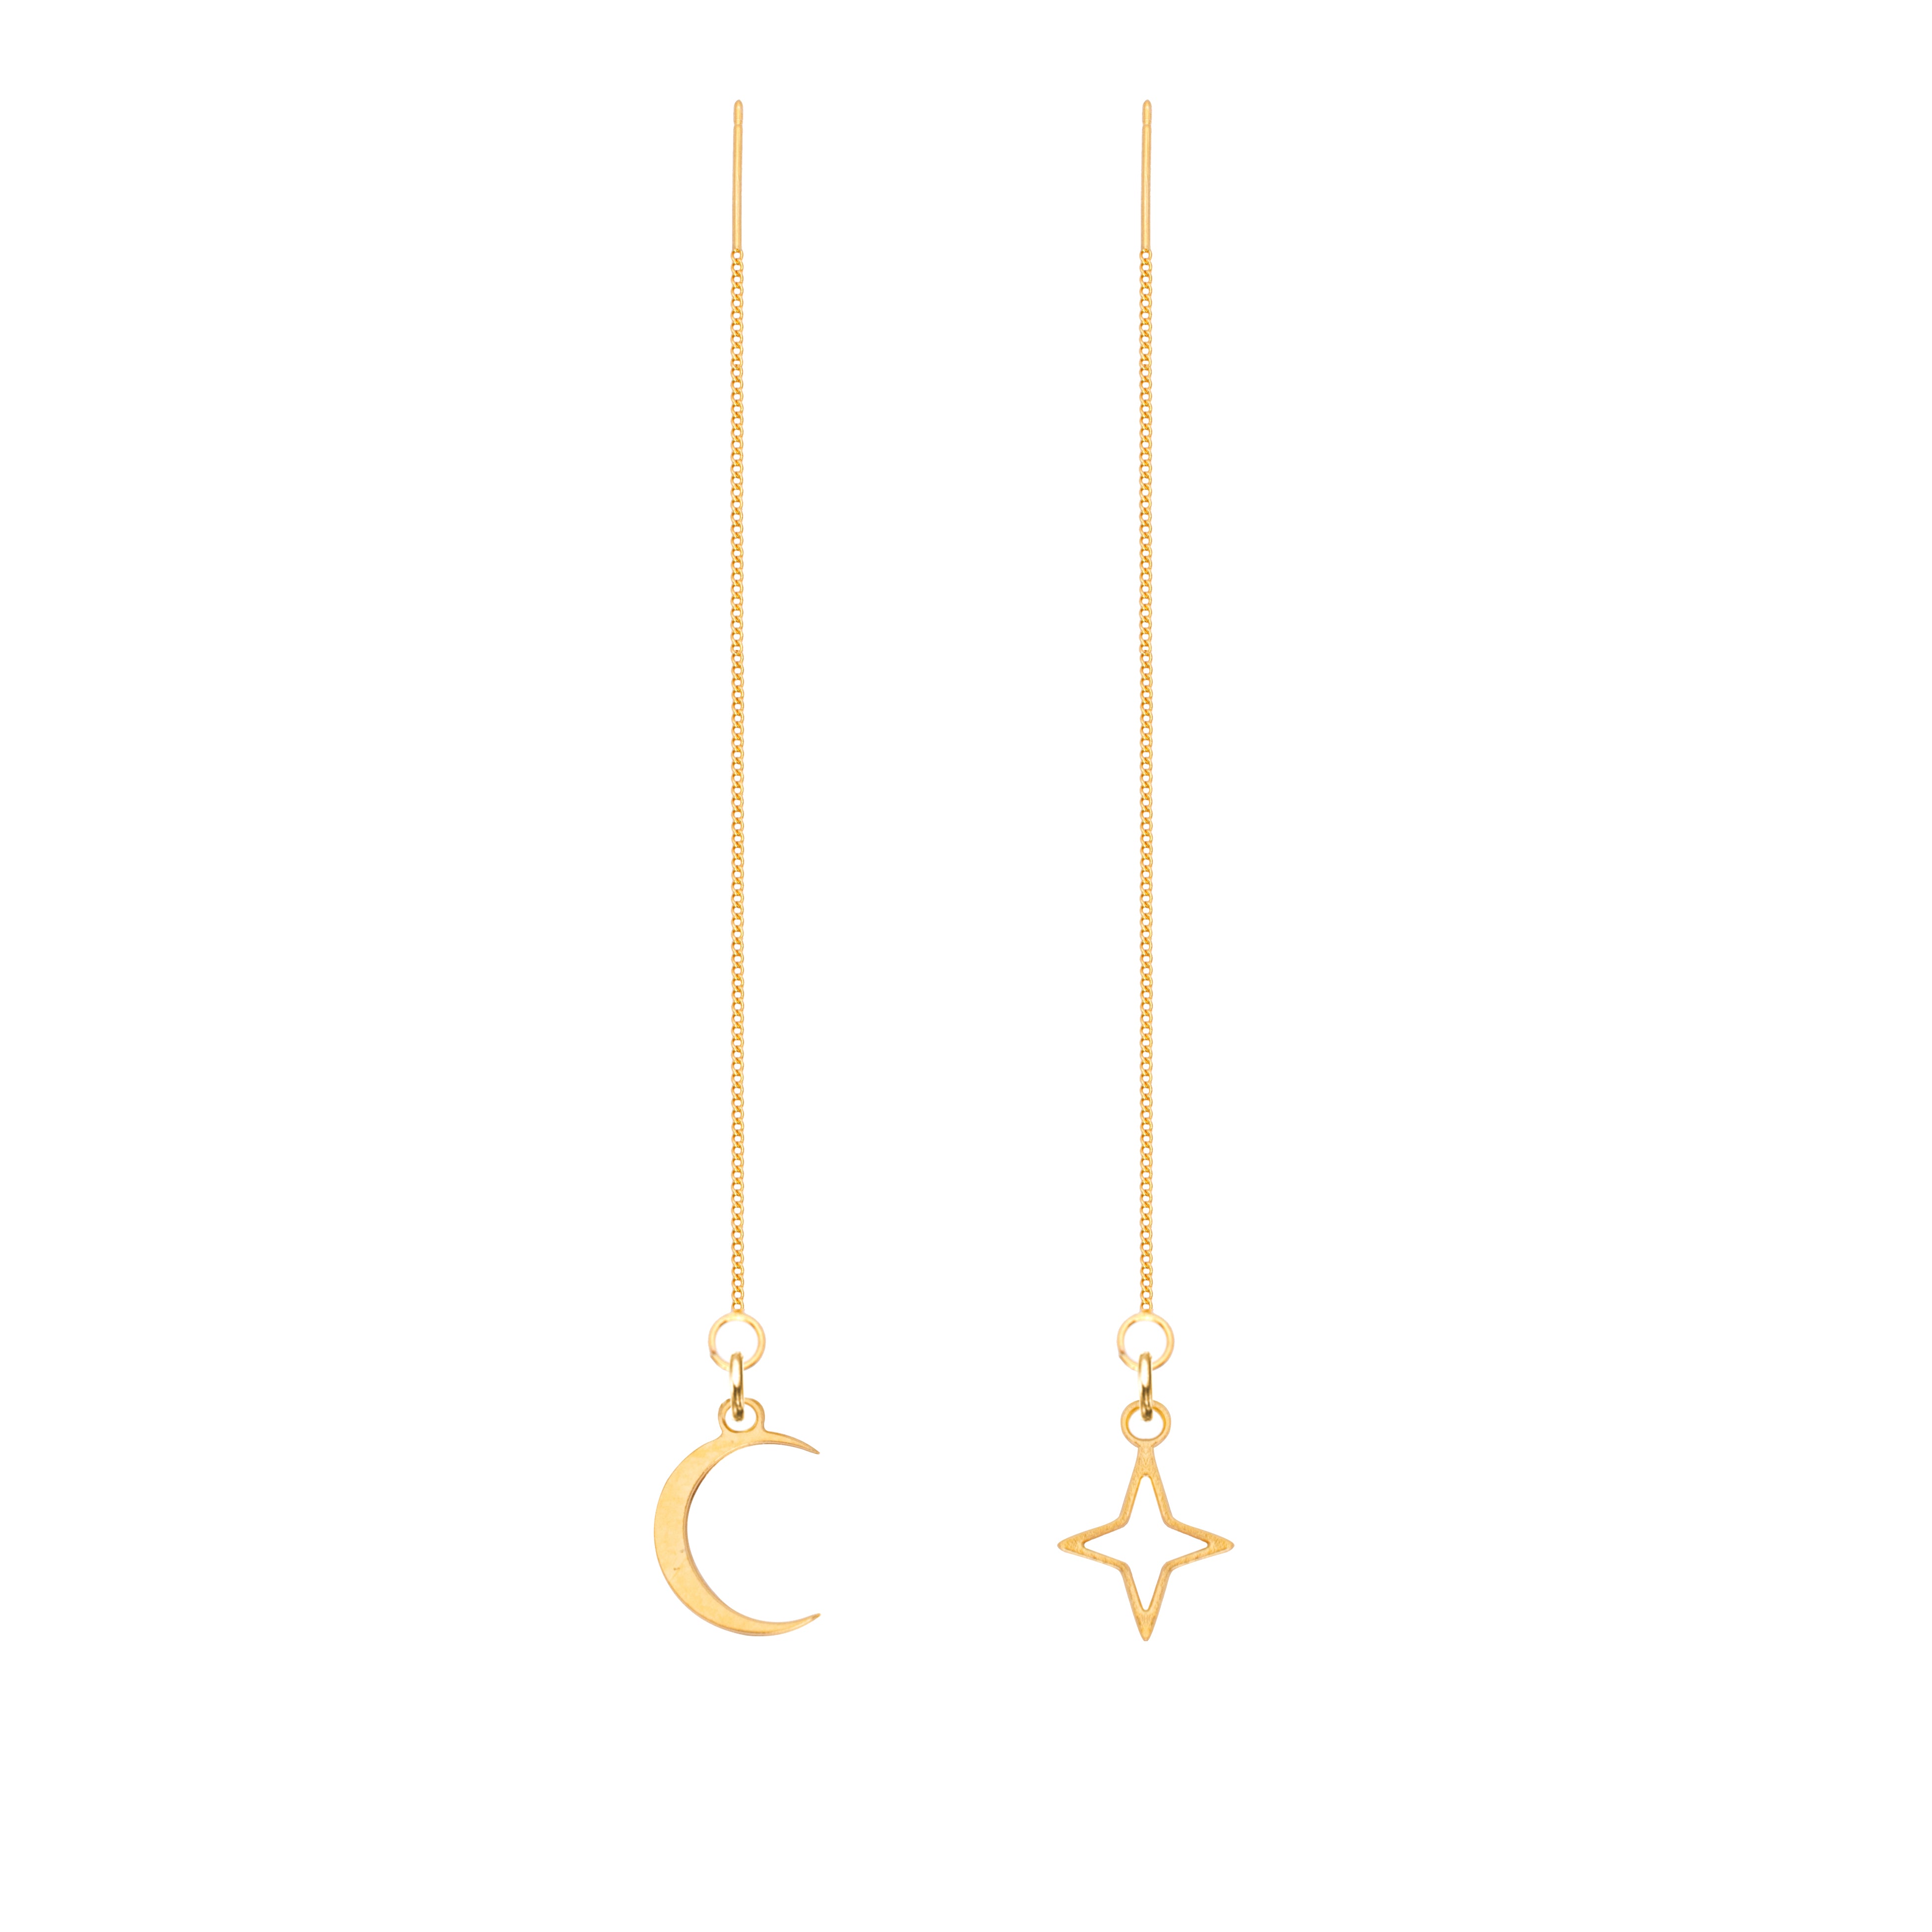 gold threader earrings with moon and stars